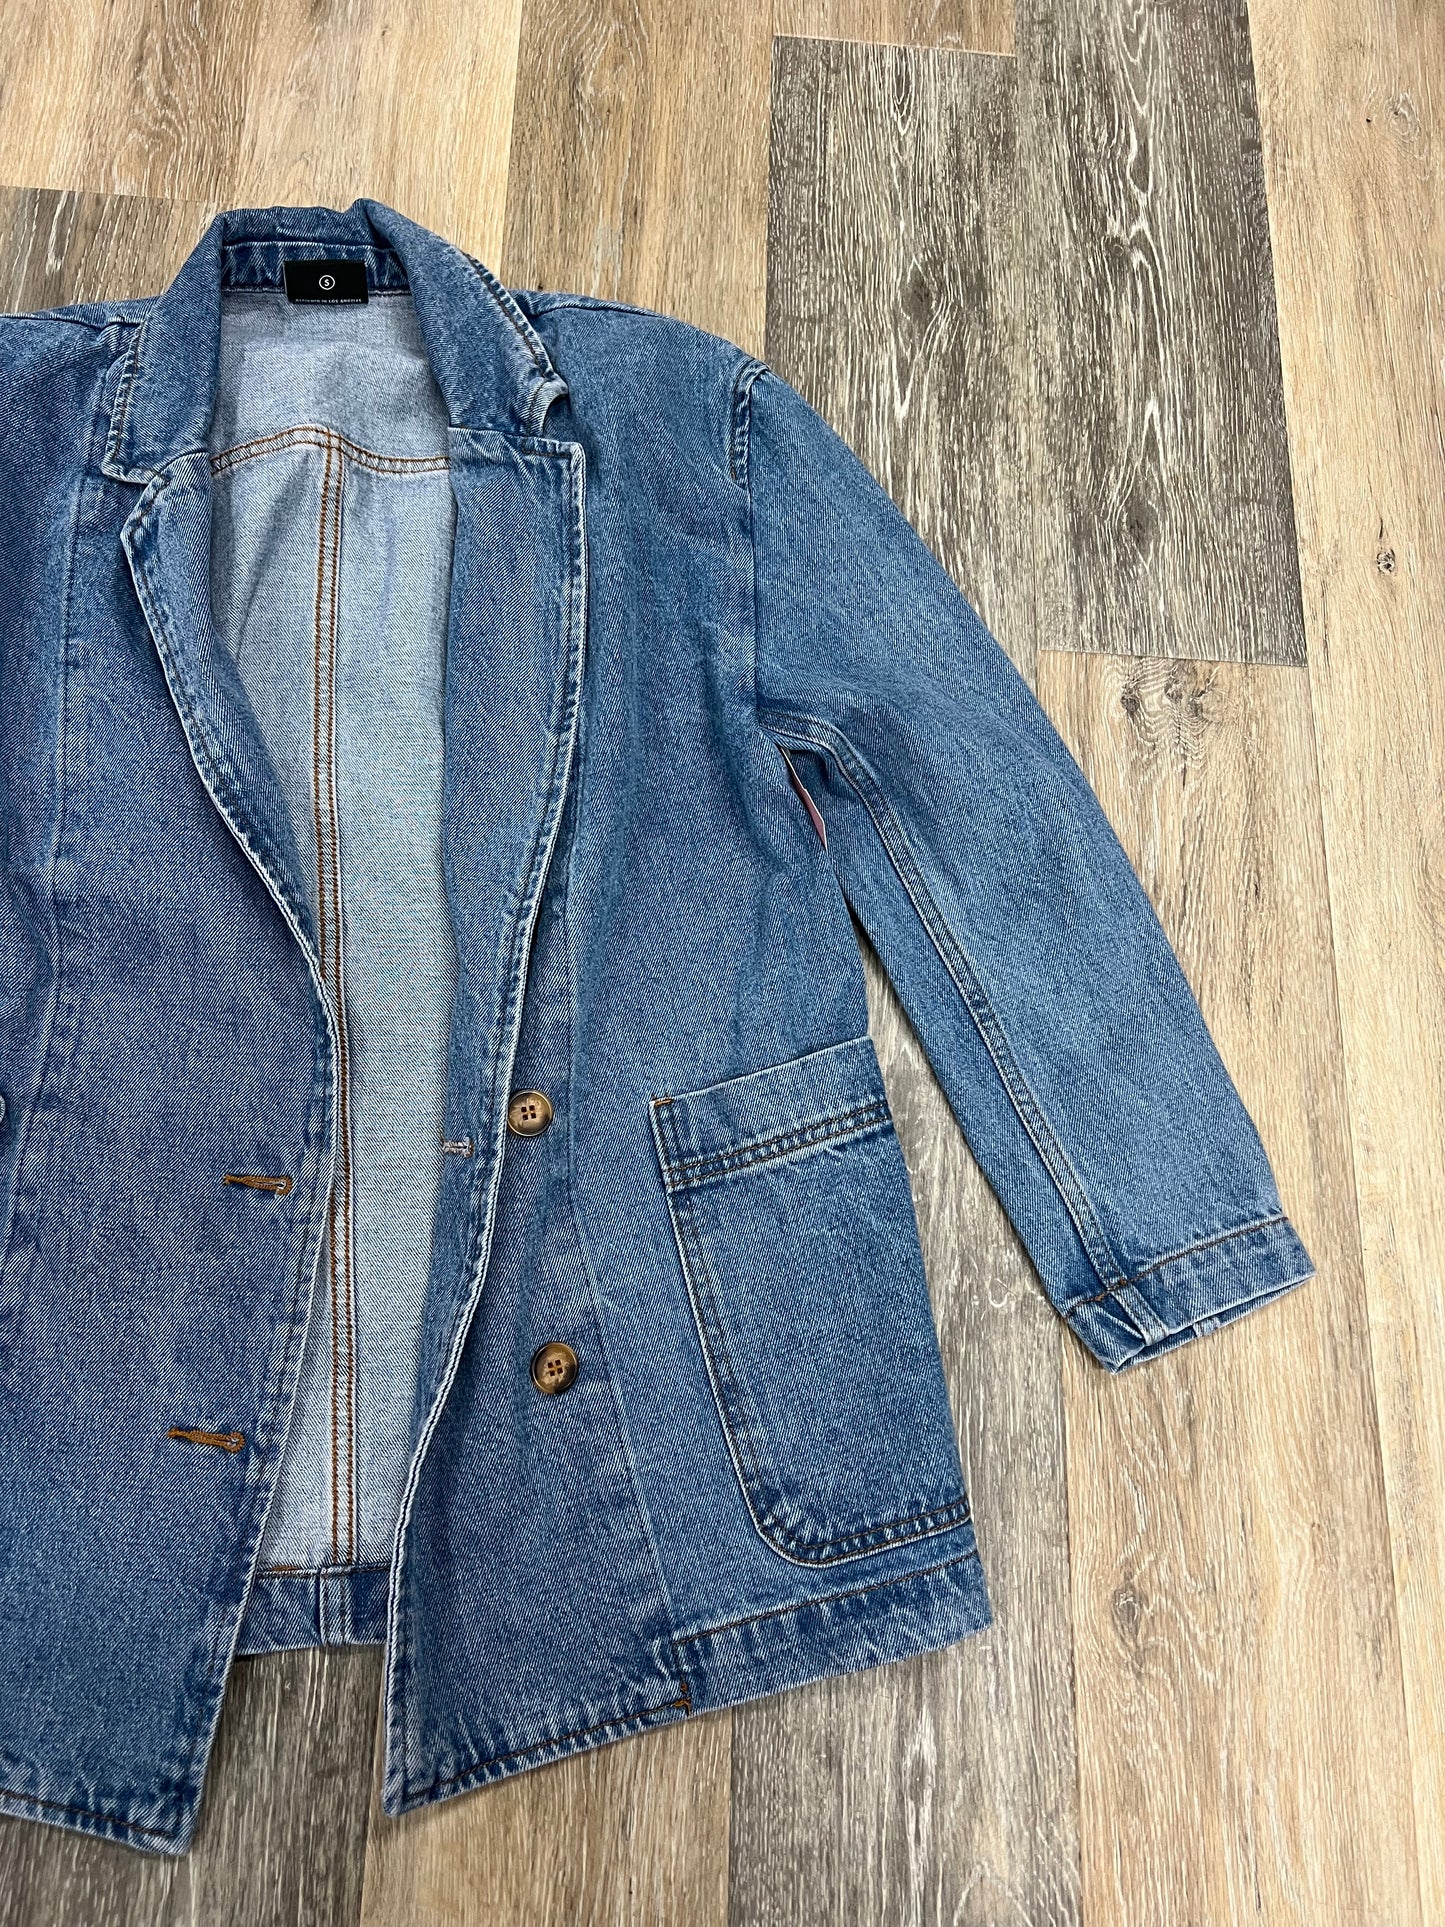 Jacket Denim By Miou Muse  Size: S